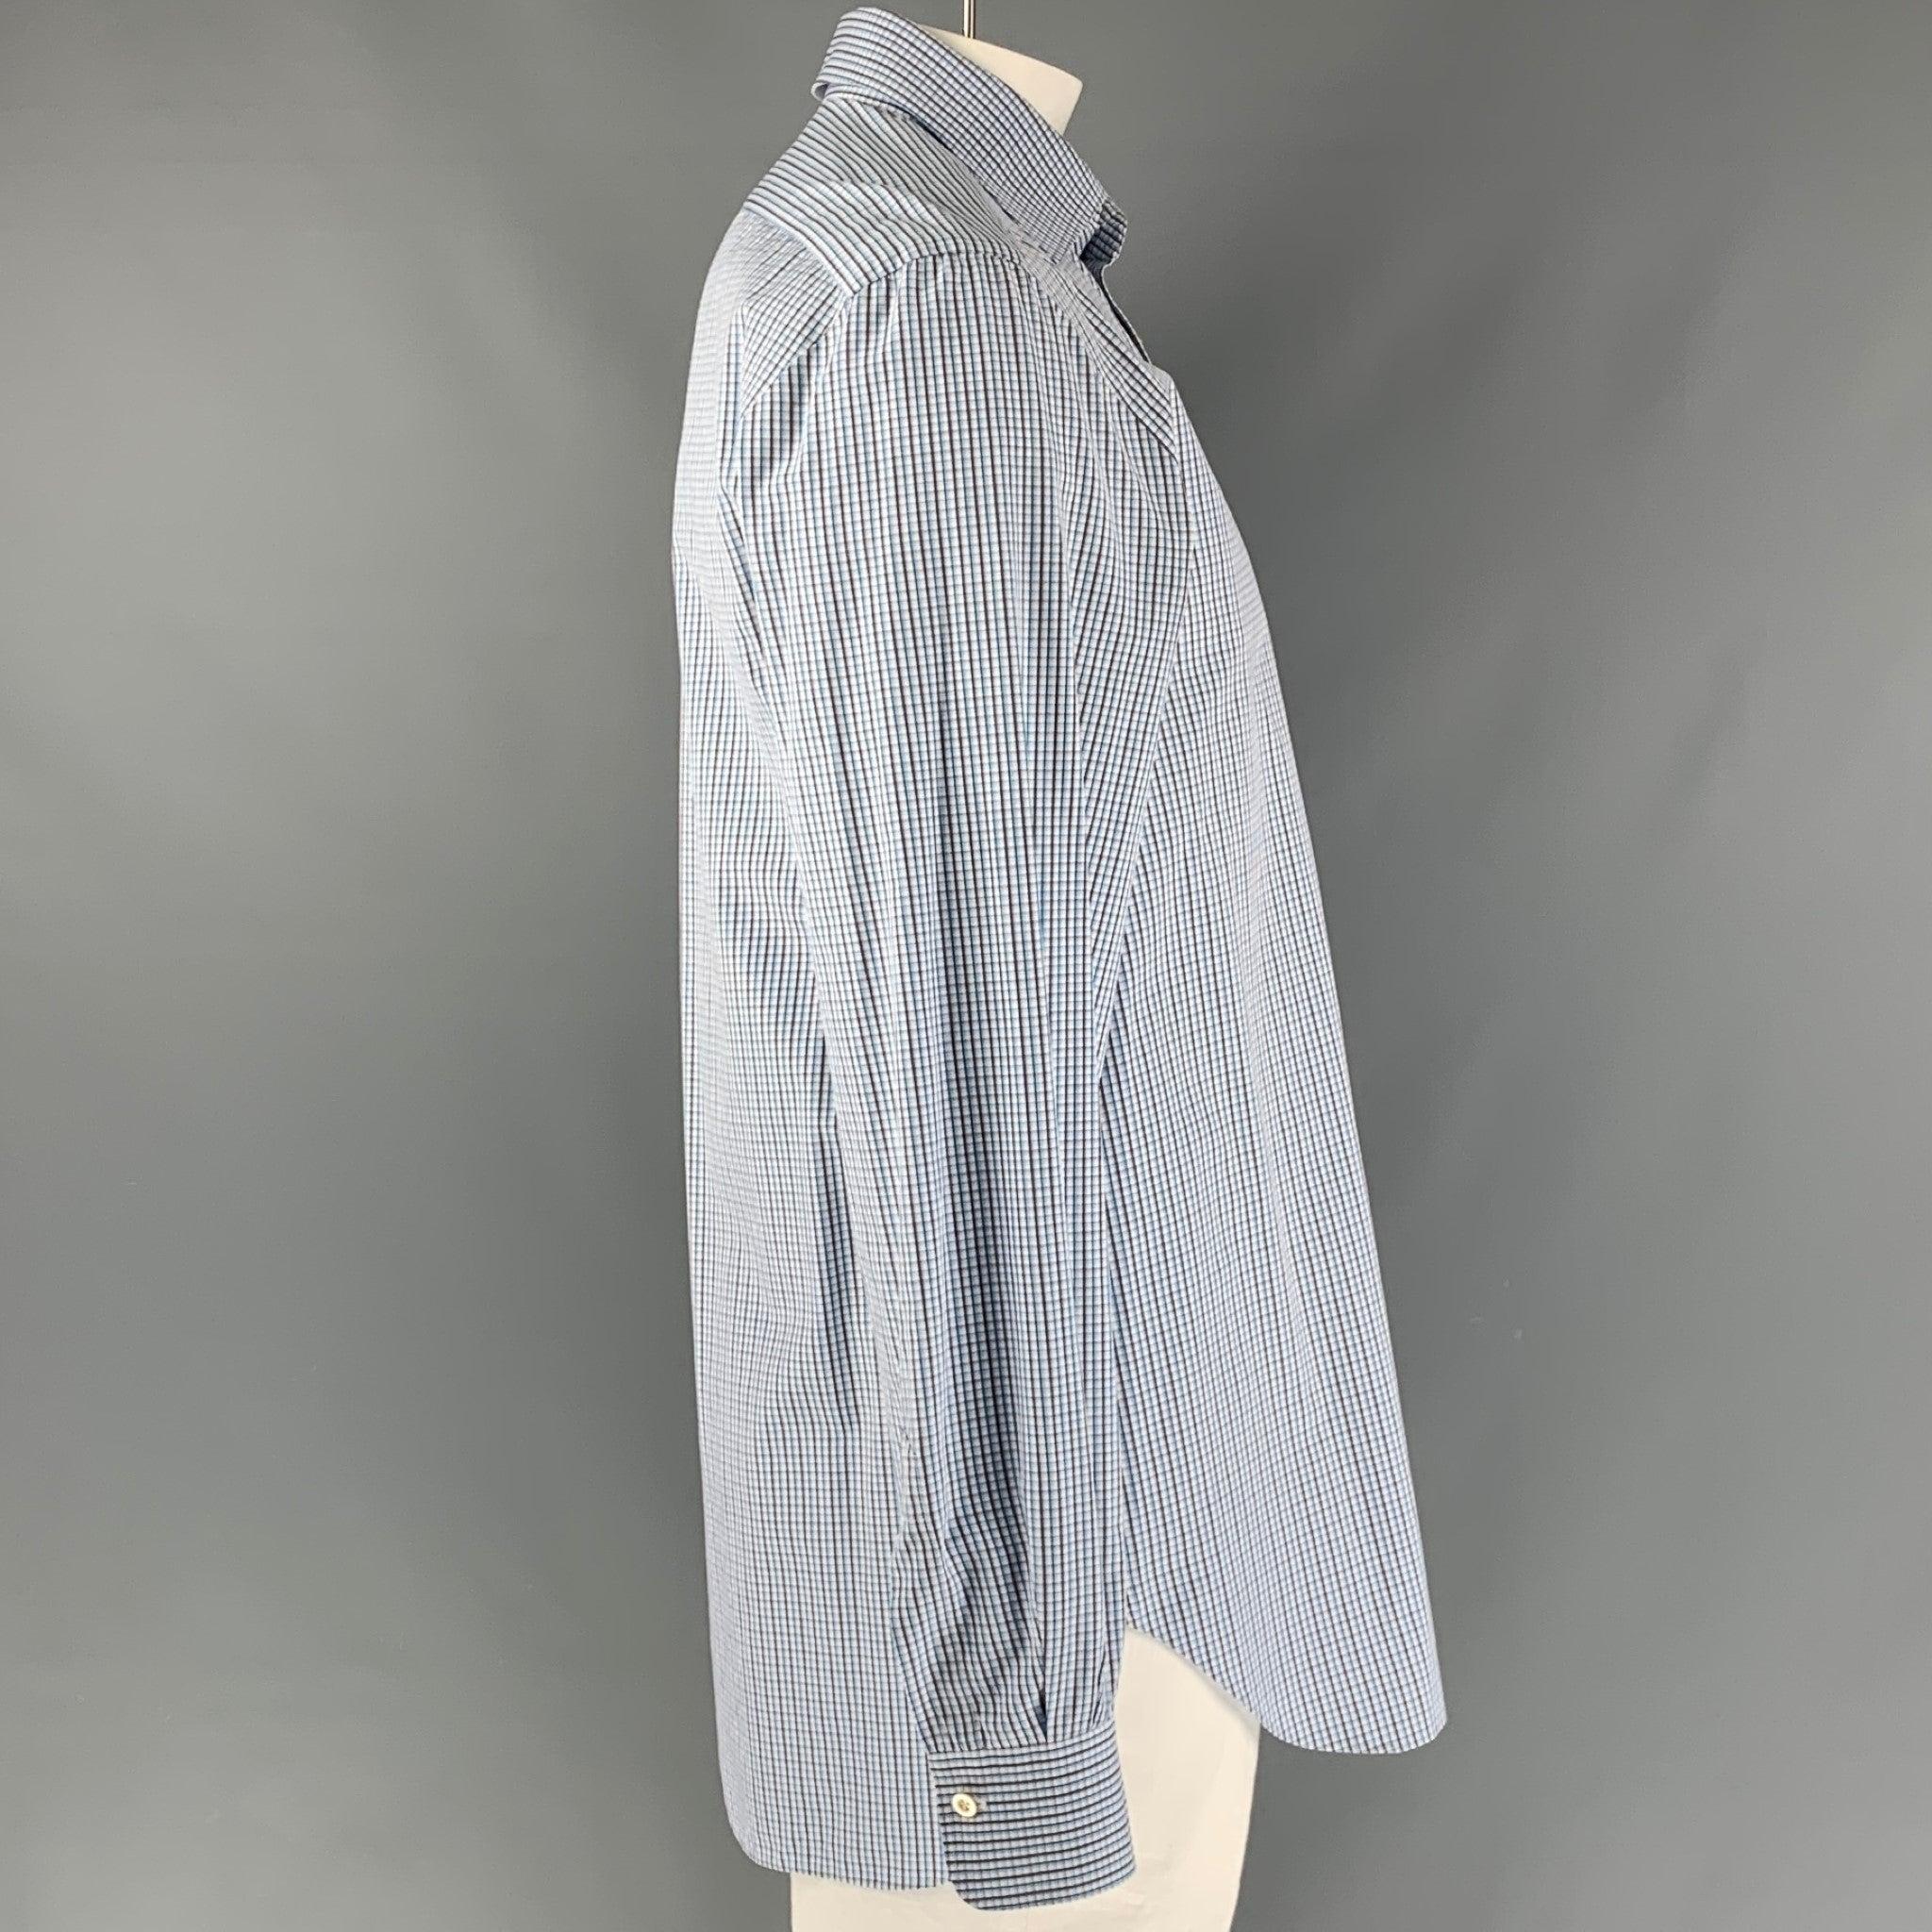 KITON long sleeve shirt comes in white, blue and grey checkered cotton featuring spread collar, and button up closure. Made in Italy.Excellent Pre-Owned Condition.  

Marked:   43- 17  

Measurements: 
  
Shoulder: 19 inches Chest: 48 inches Sleeve: